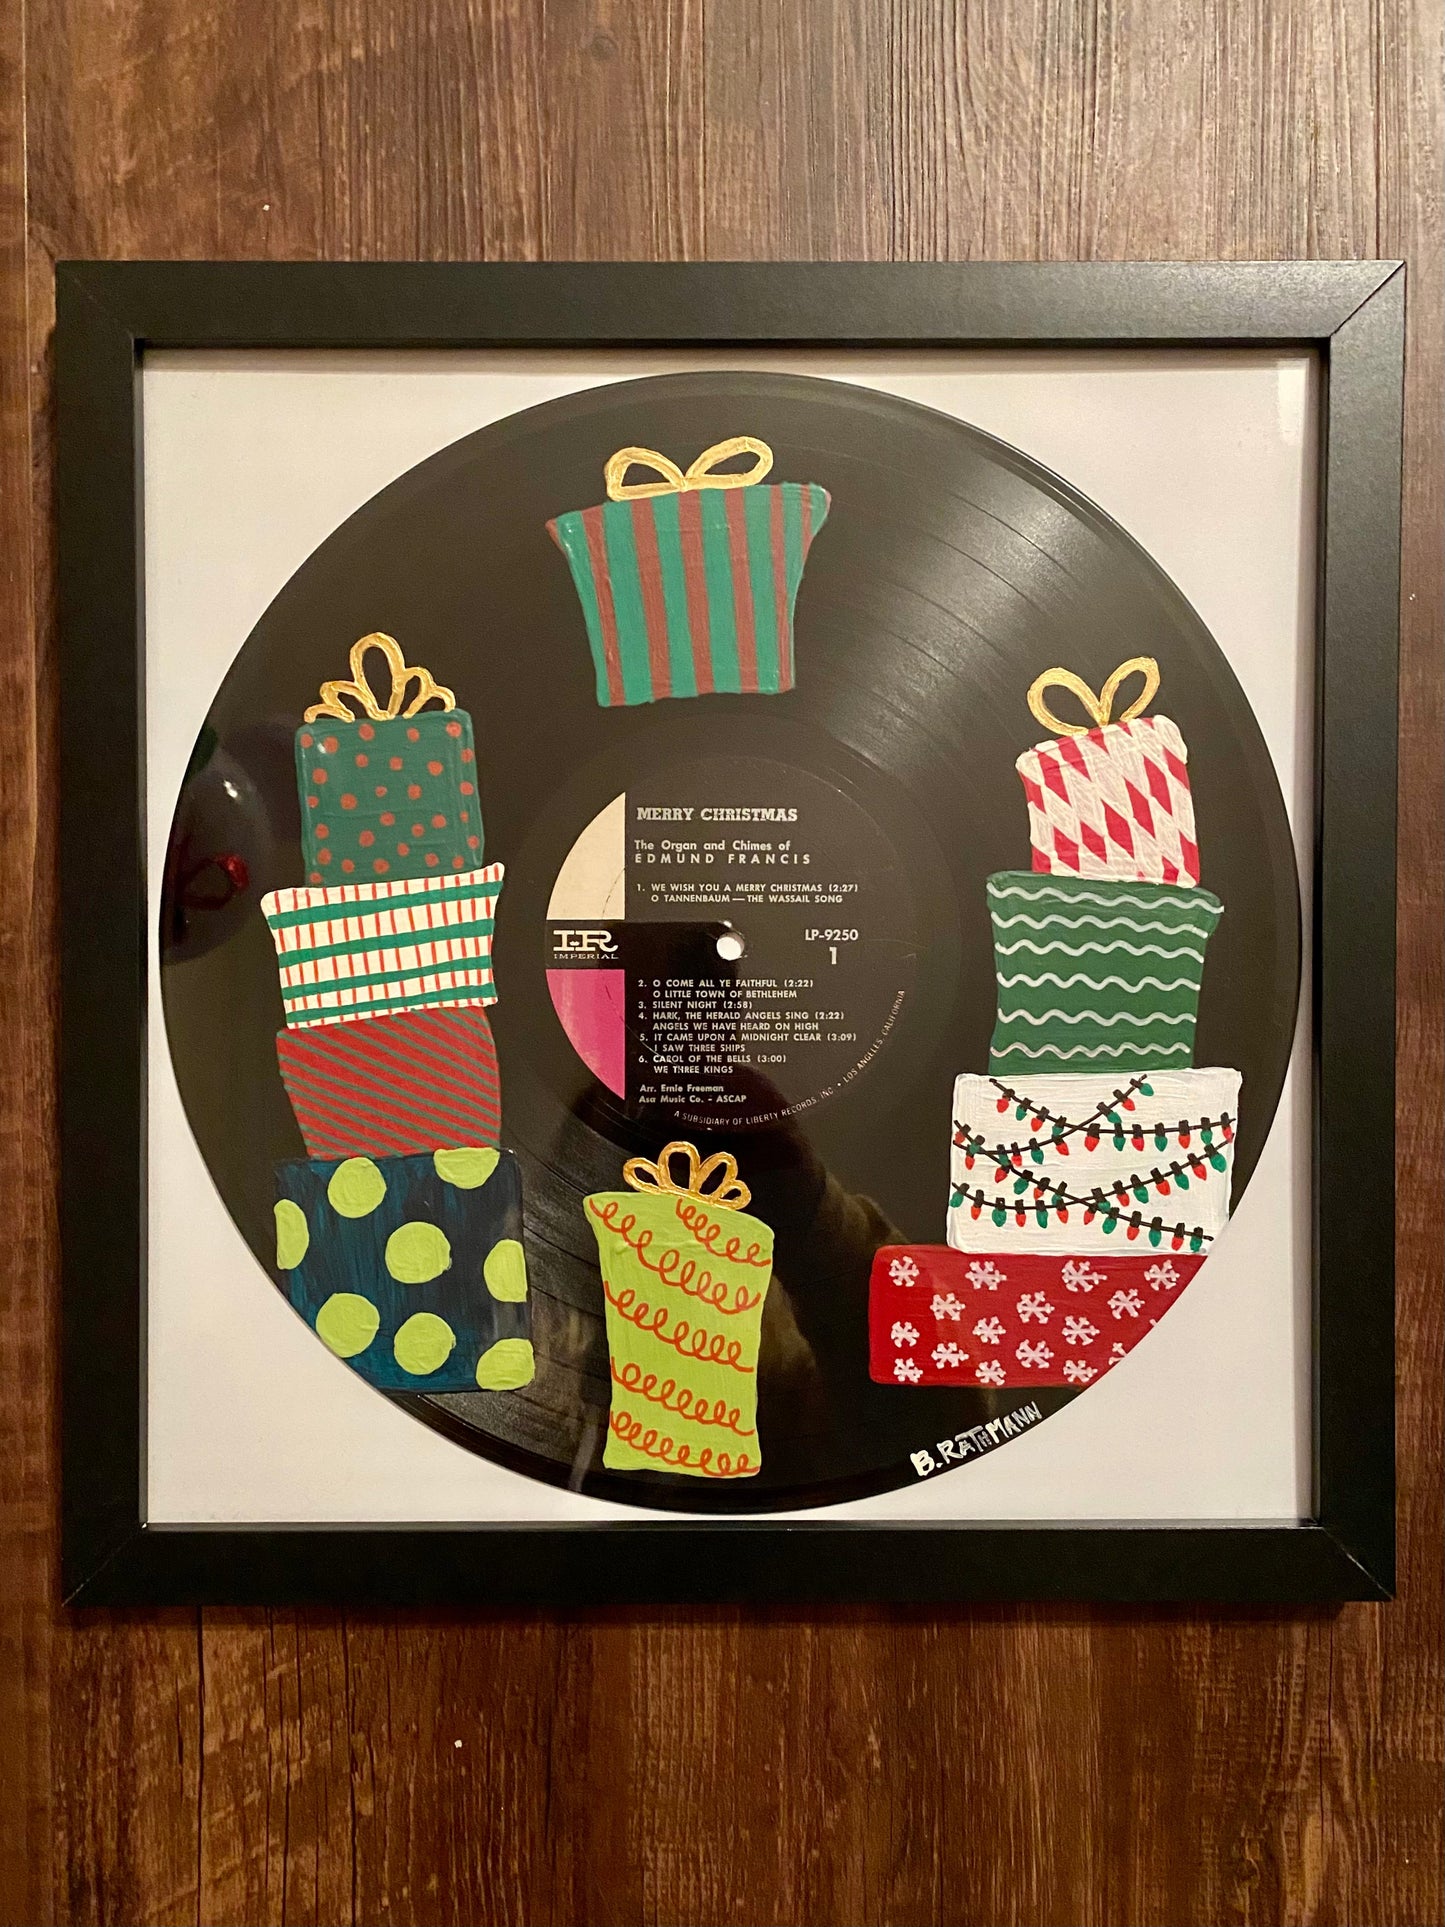 We Wish You a Merry Christmas  Record is an acrylic painting of a dreamy winter wonderland with a snowman and a Christmas tree! This original painting is perfect for any space. This work was done on a repurposed vinyl record bought at a local thrift store. This was inspired by the music listed on the vinyl album. The frame is included with purchase.